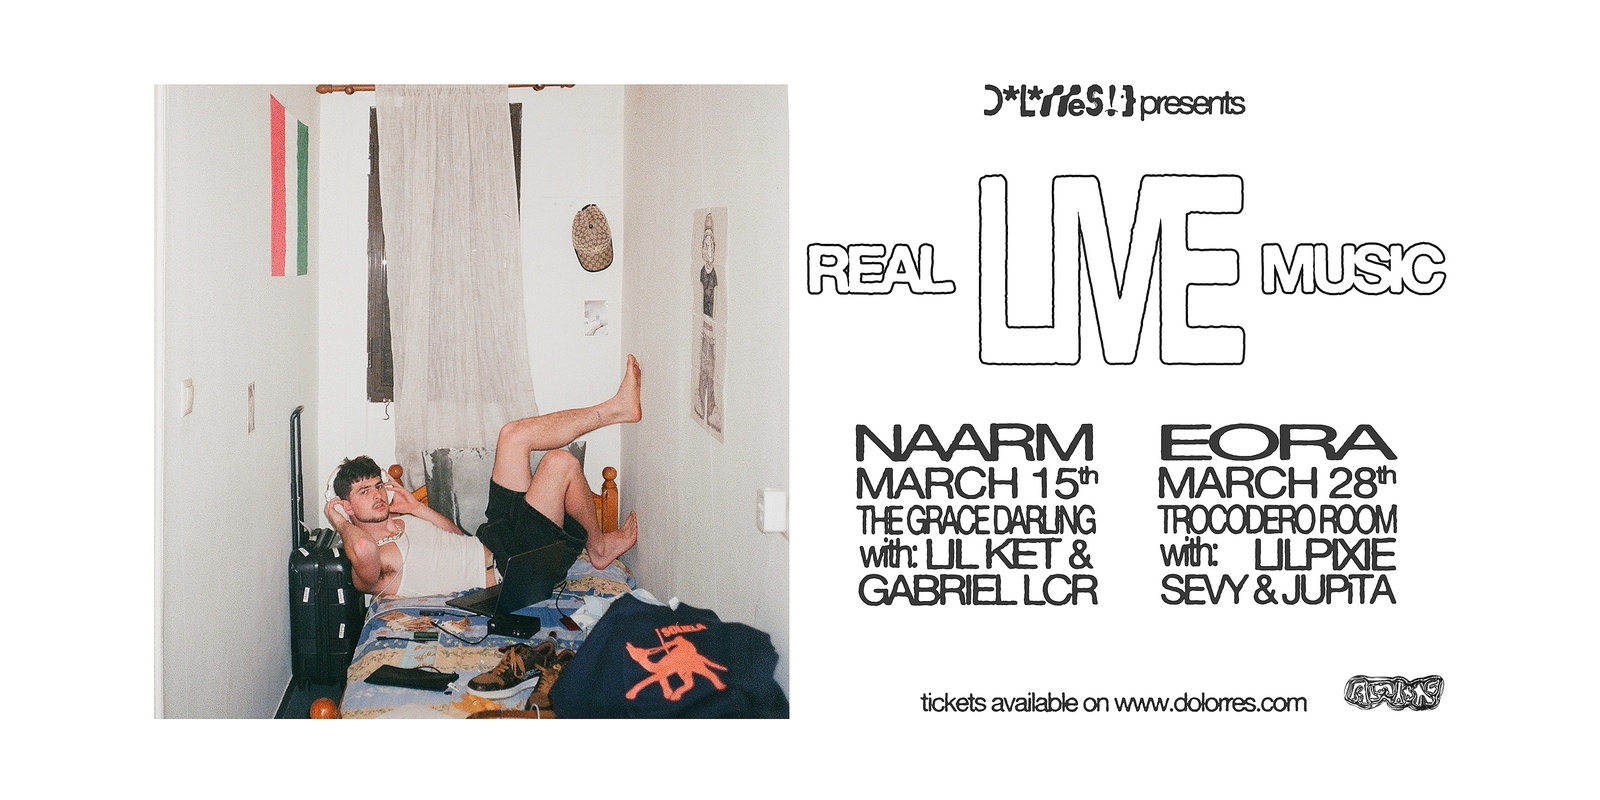 Banner image for  DoloRRes Presents: REAL LIVE MUSIC (NAARM) with GABRIEL LCR & LIL KET